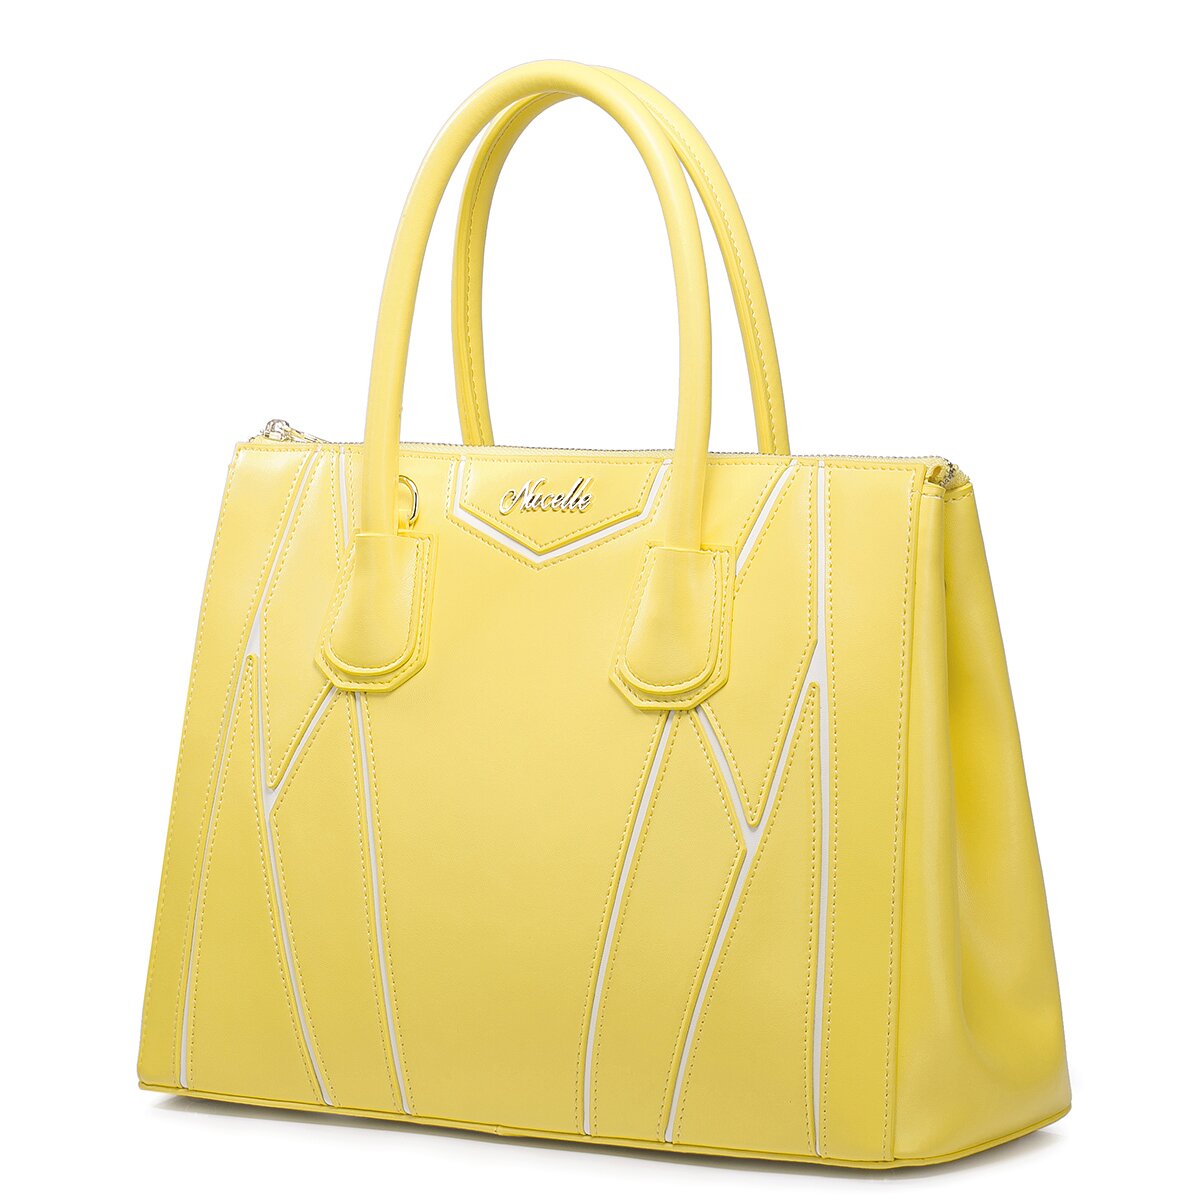 July New fashion NUCELLE leather handbag Yellow